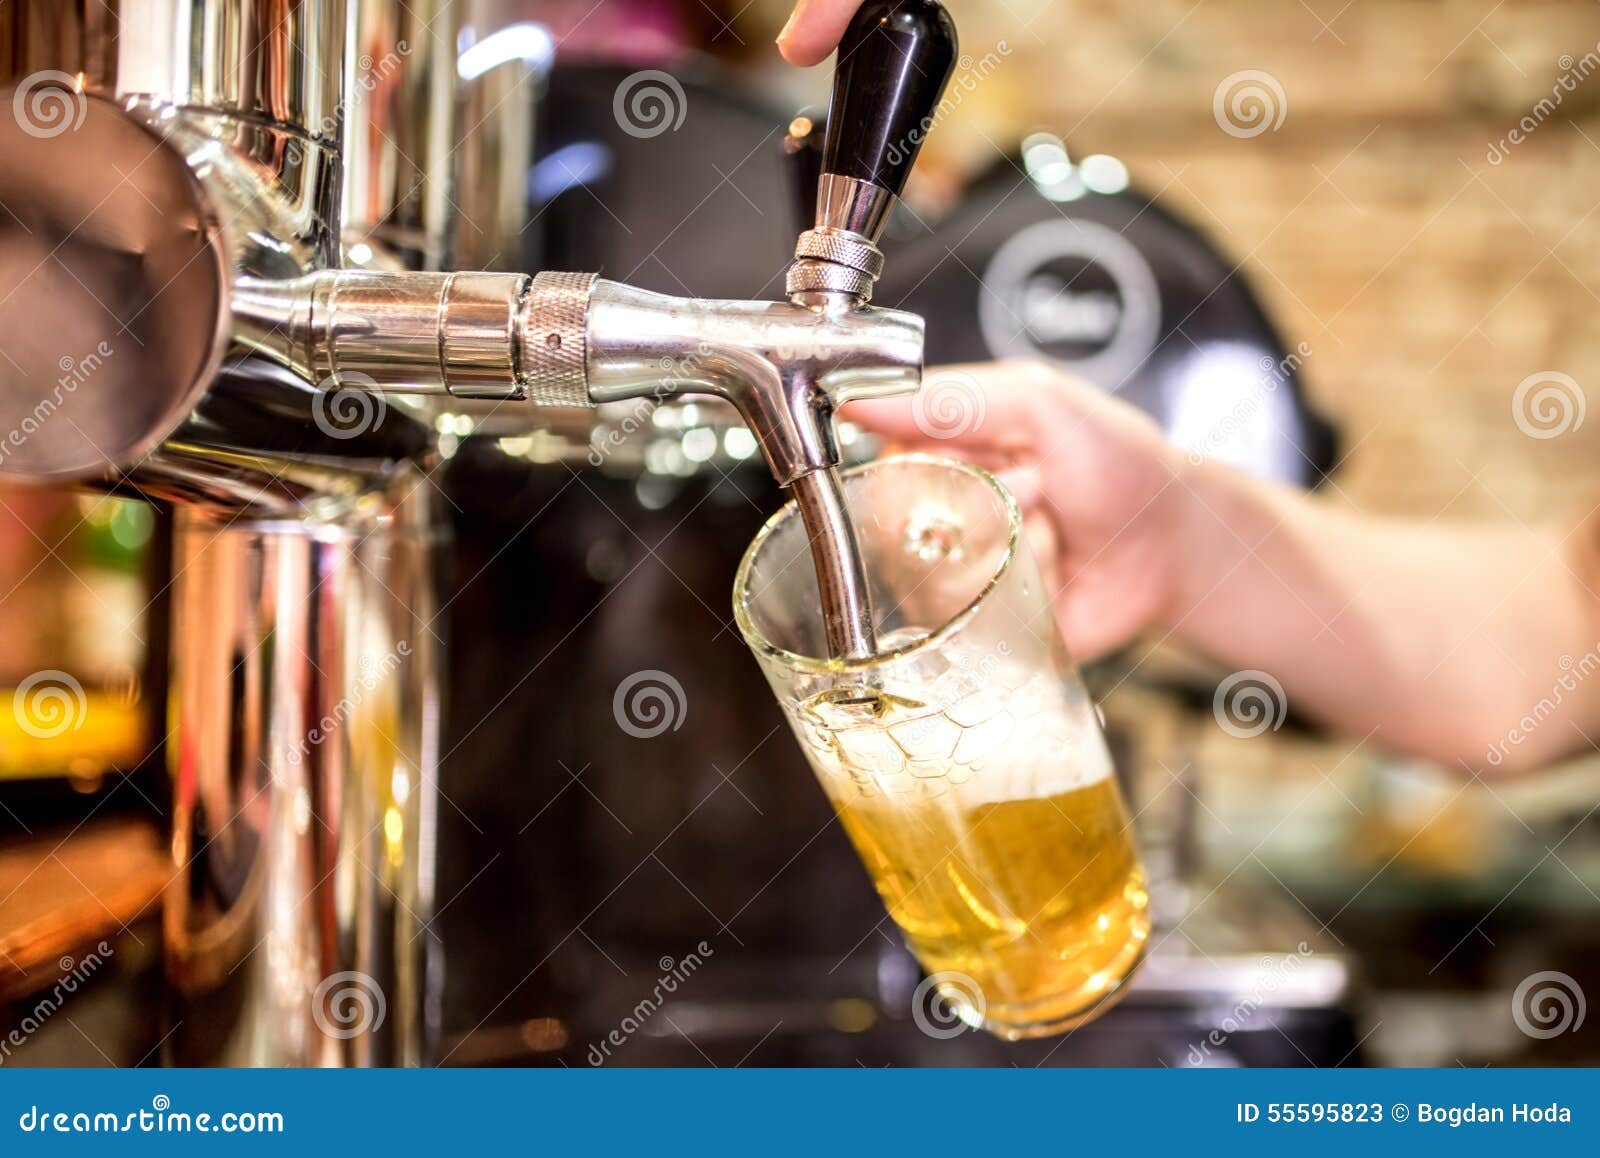 barman hands at beer tap pouring a draught lager beer serving in a restaurant or pub